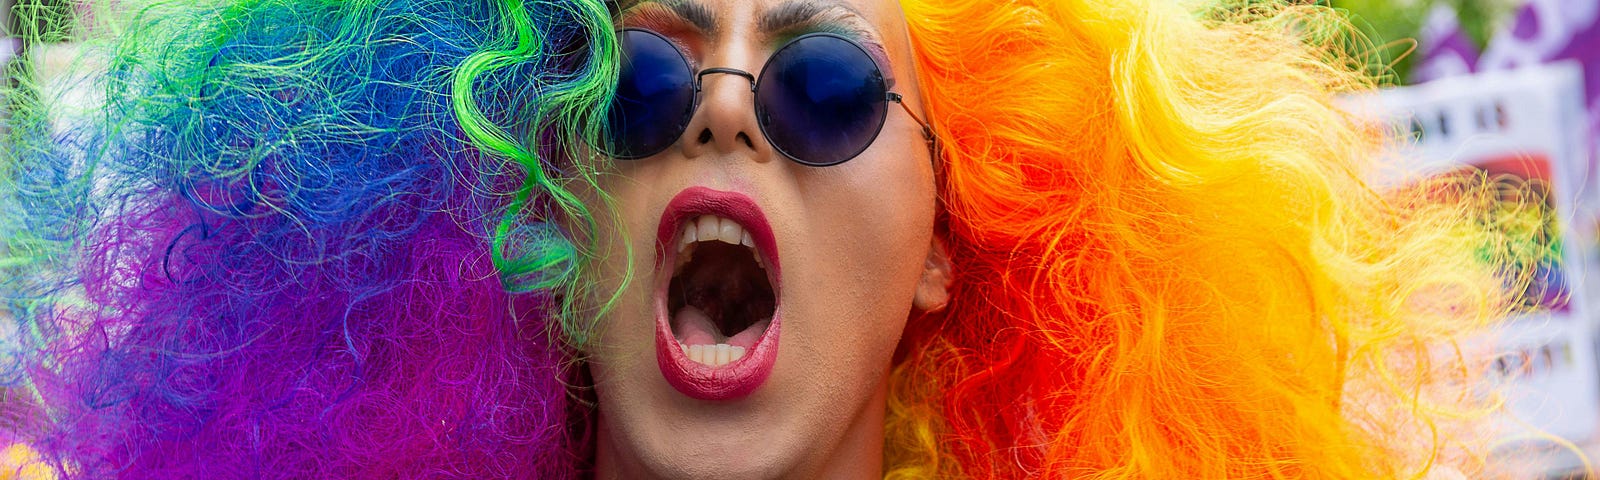 Headshot of person with long frizzy rainbow hair and eyeshadow, round sunglasses, and red lipstick yelling at the camera